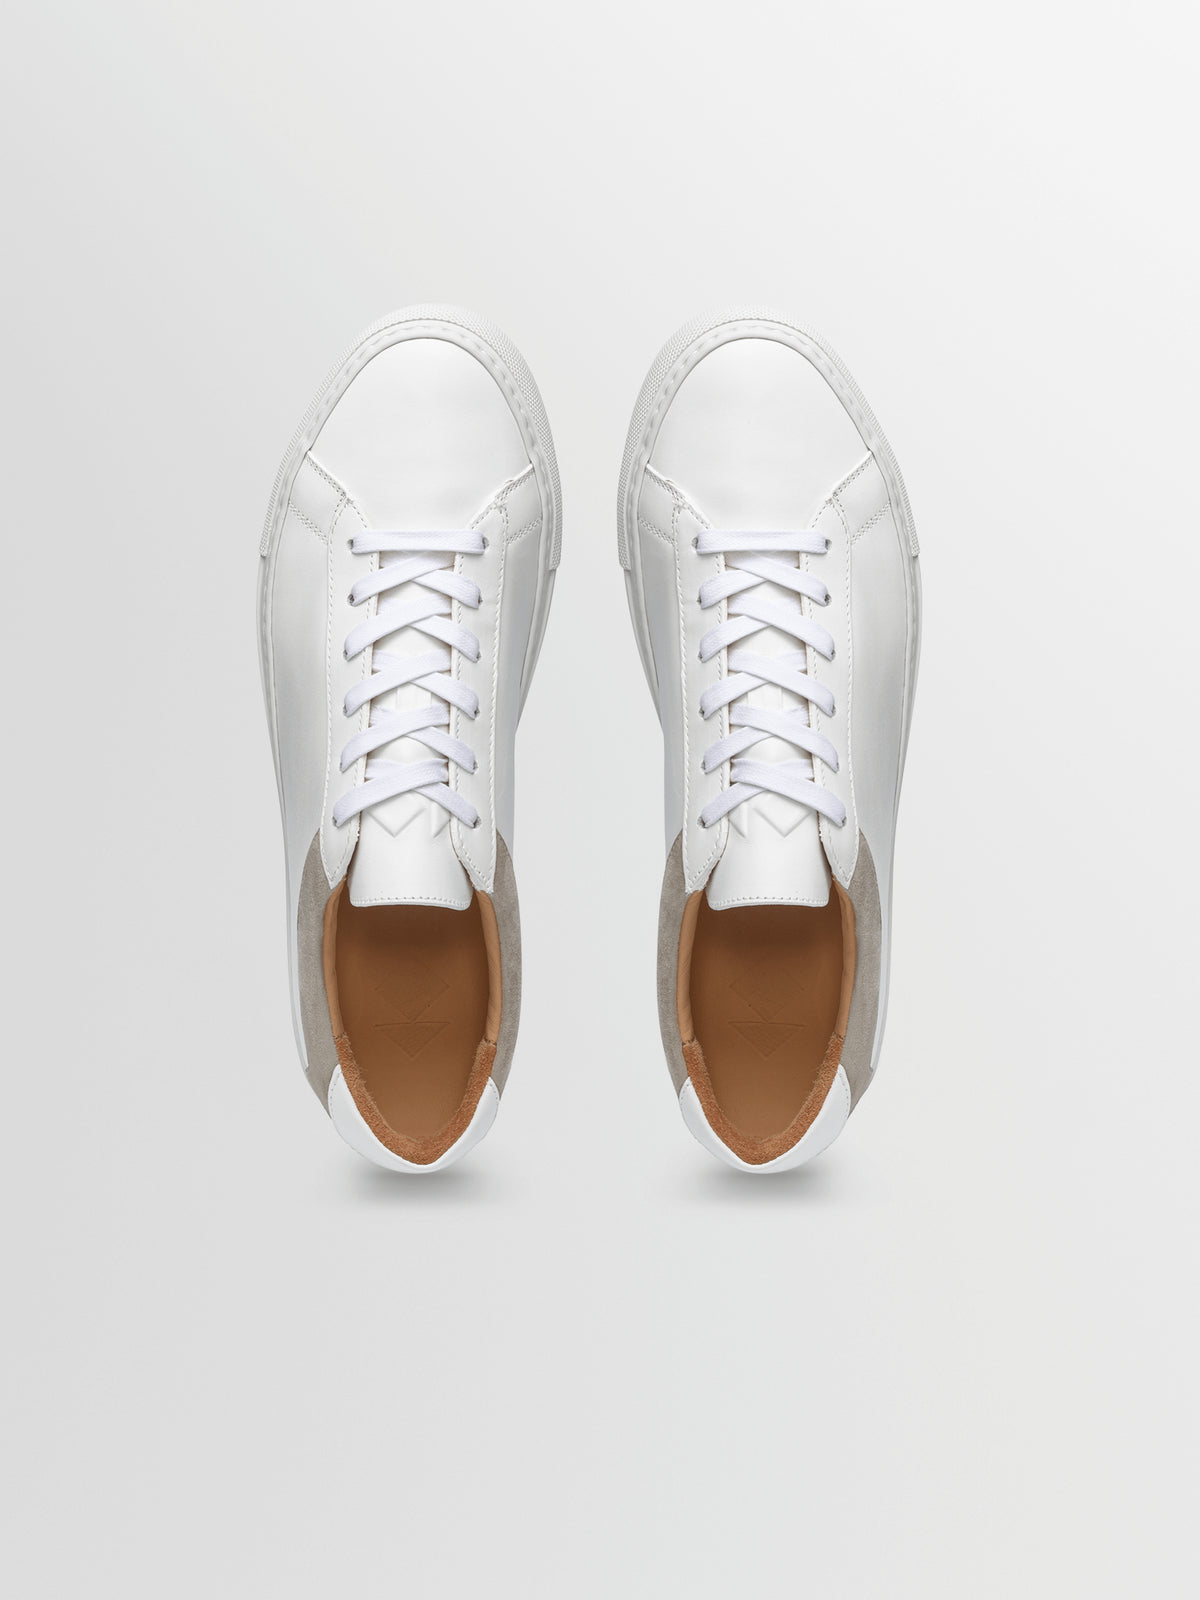 Leather & Suede Shoes | Men's Sneaker | KOIO